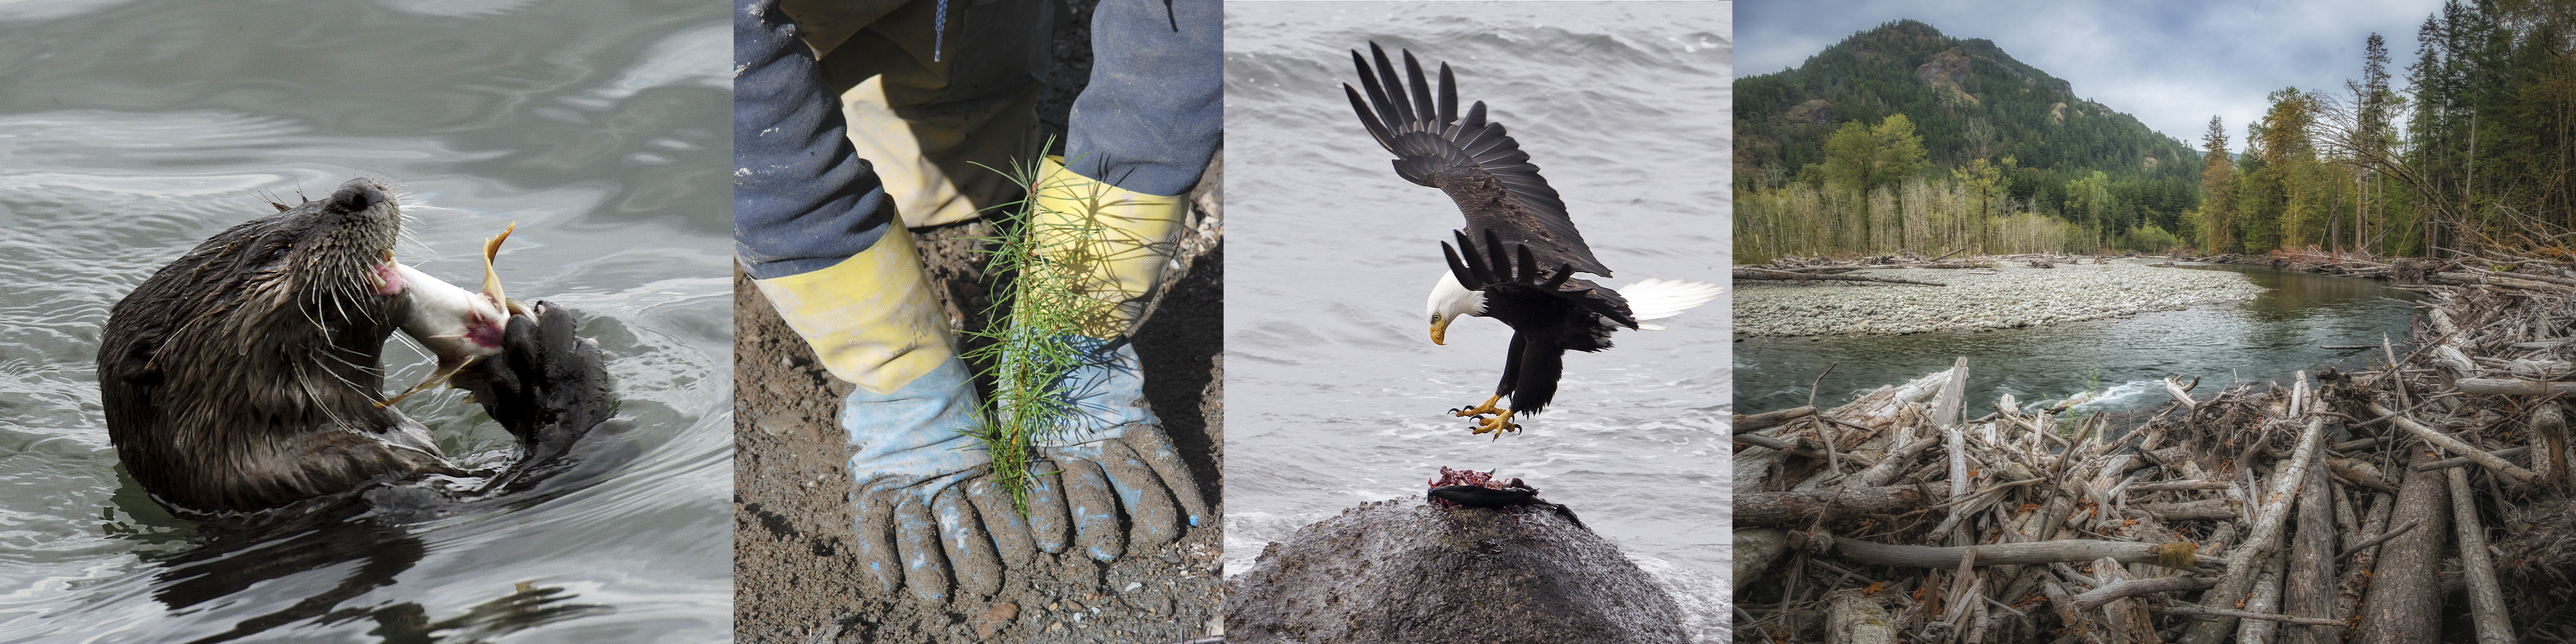 Otter eating a fish, planting of a Douglas Fir, bald eagle eating fish, scenic Elwha River.